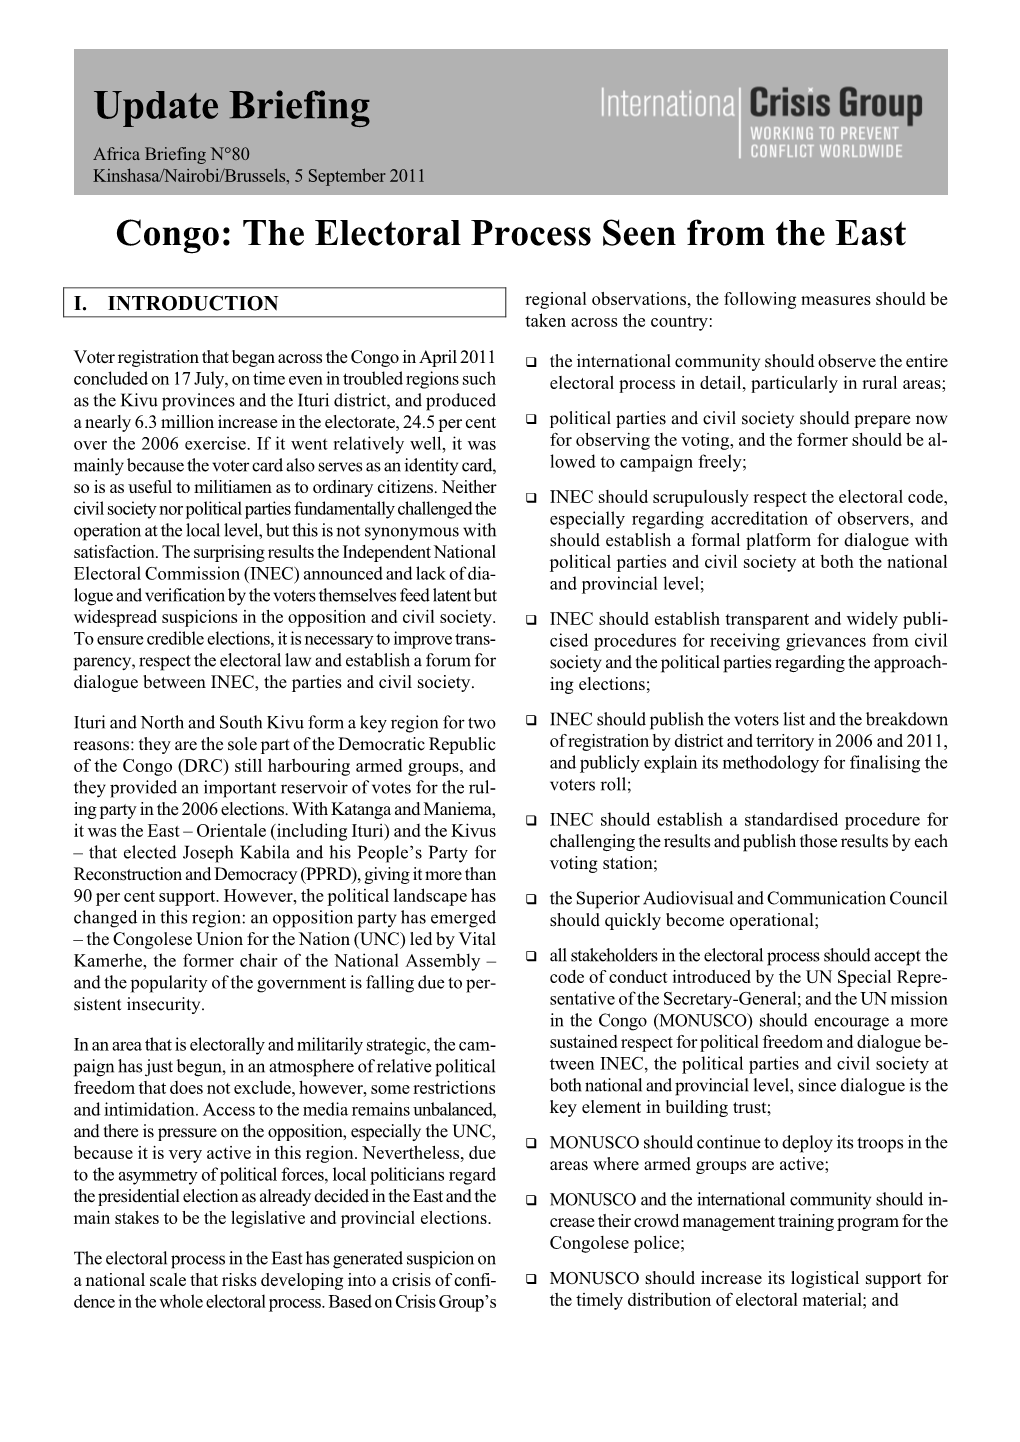 Update Briefing Africa Briefing N°80 Kinshasa/Nairobi/Brussels, 5 September 2011 Congo: the Electoral Process Seen from the East